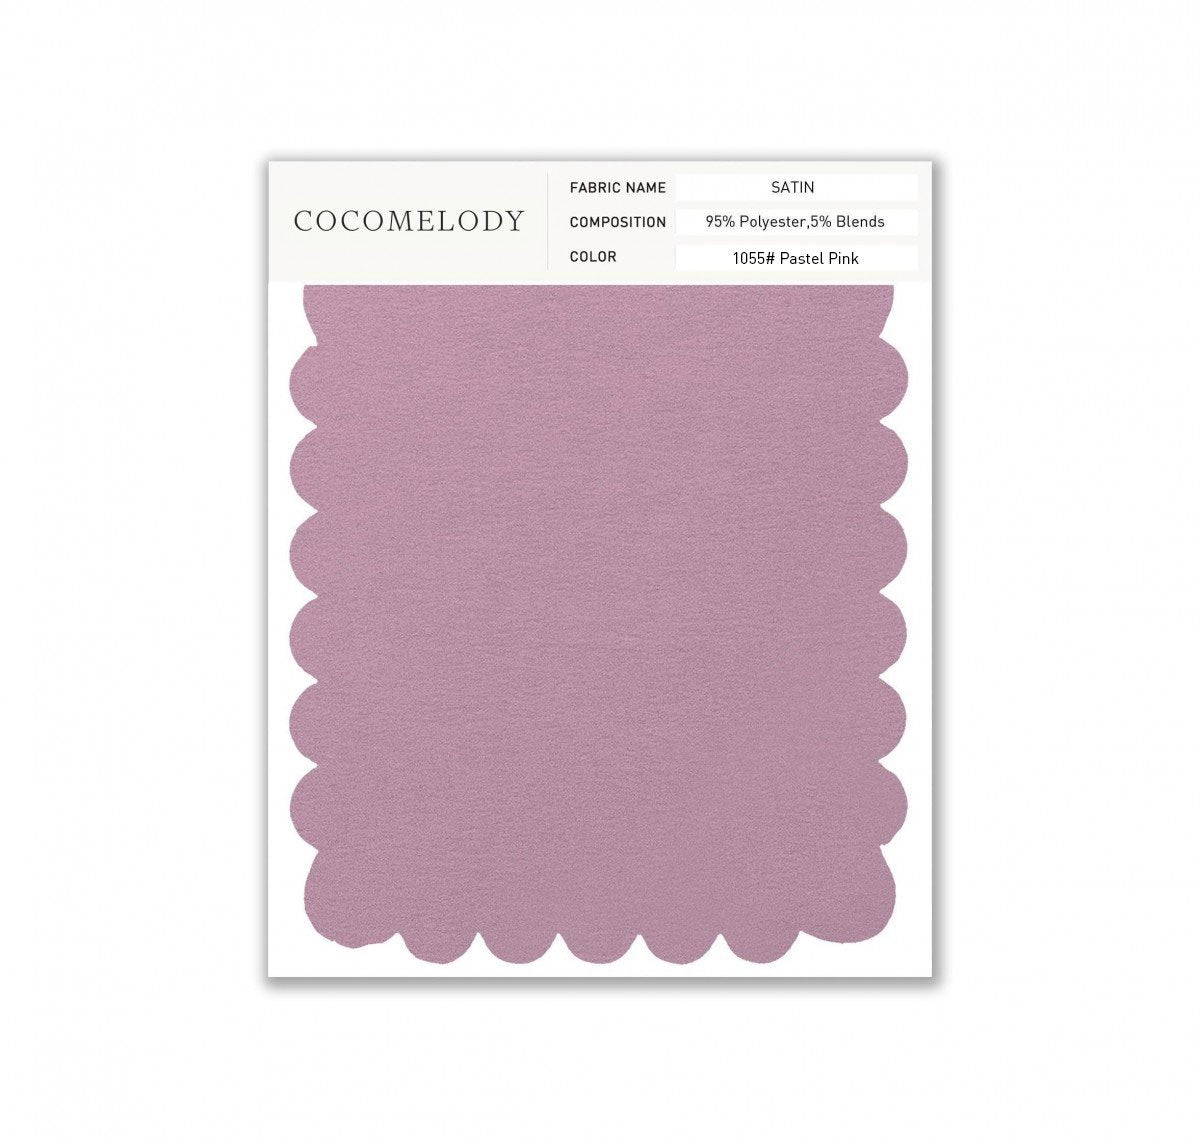 Satin Fabric Swatch in Single Color